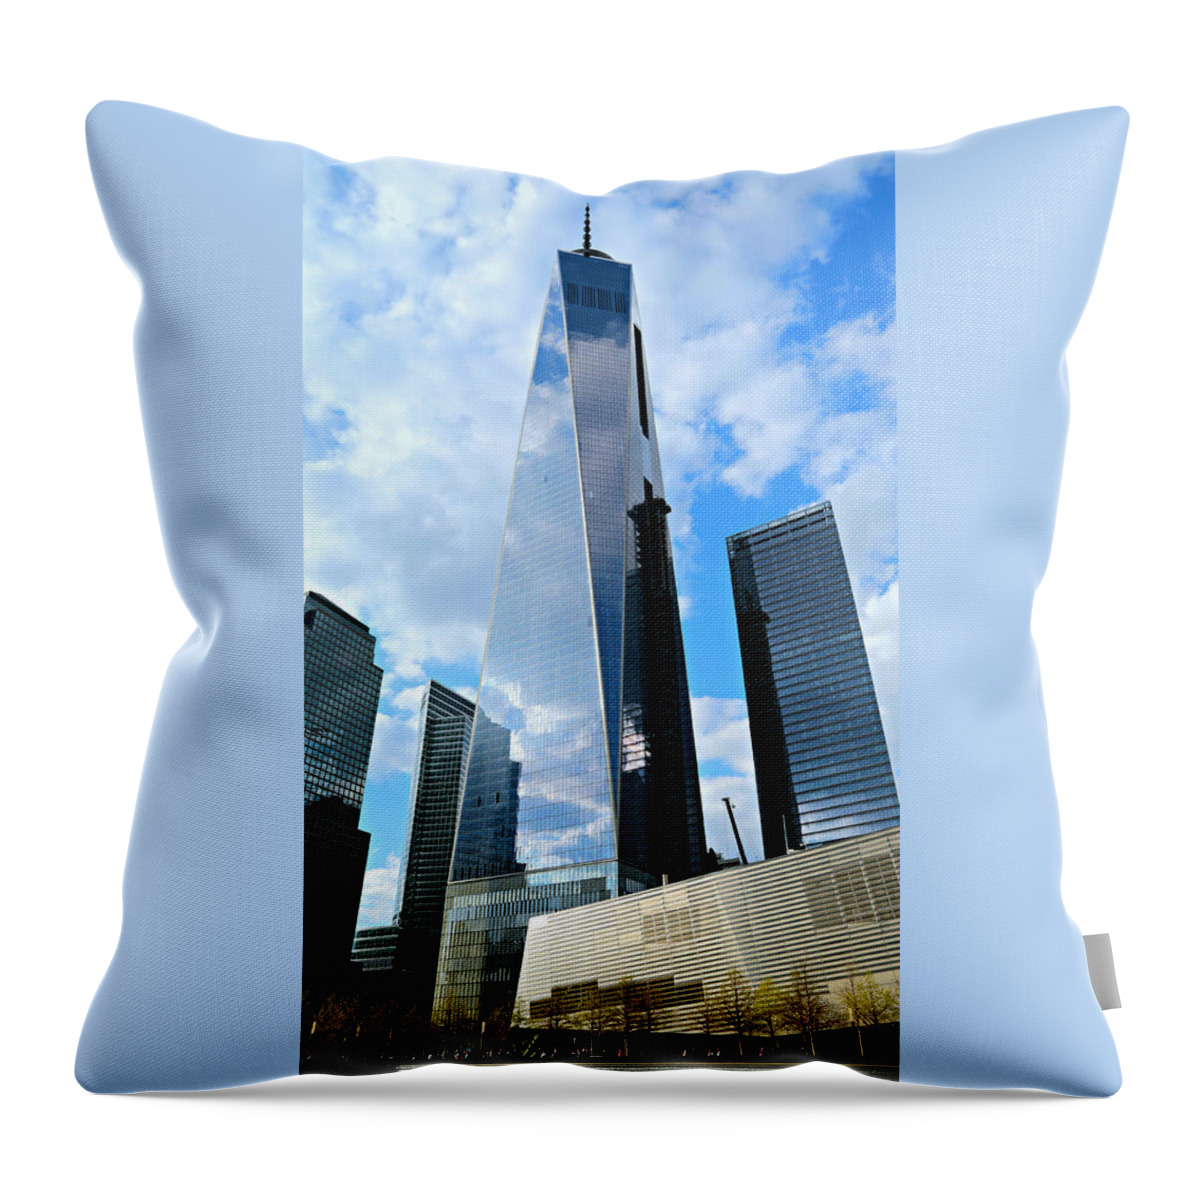 New York City Throw Pillow featuring the photograph Freedom Tower by Stephen Stookey